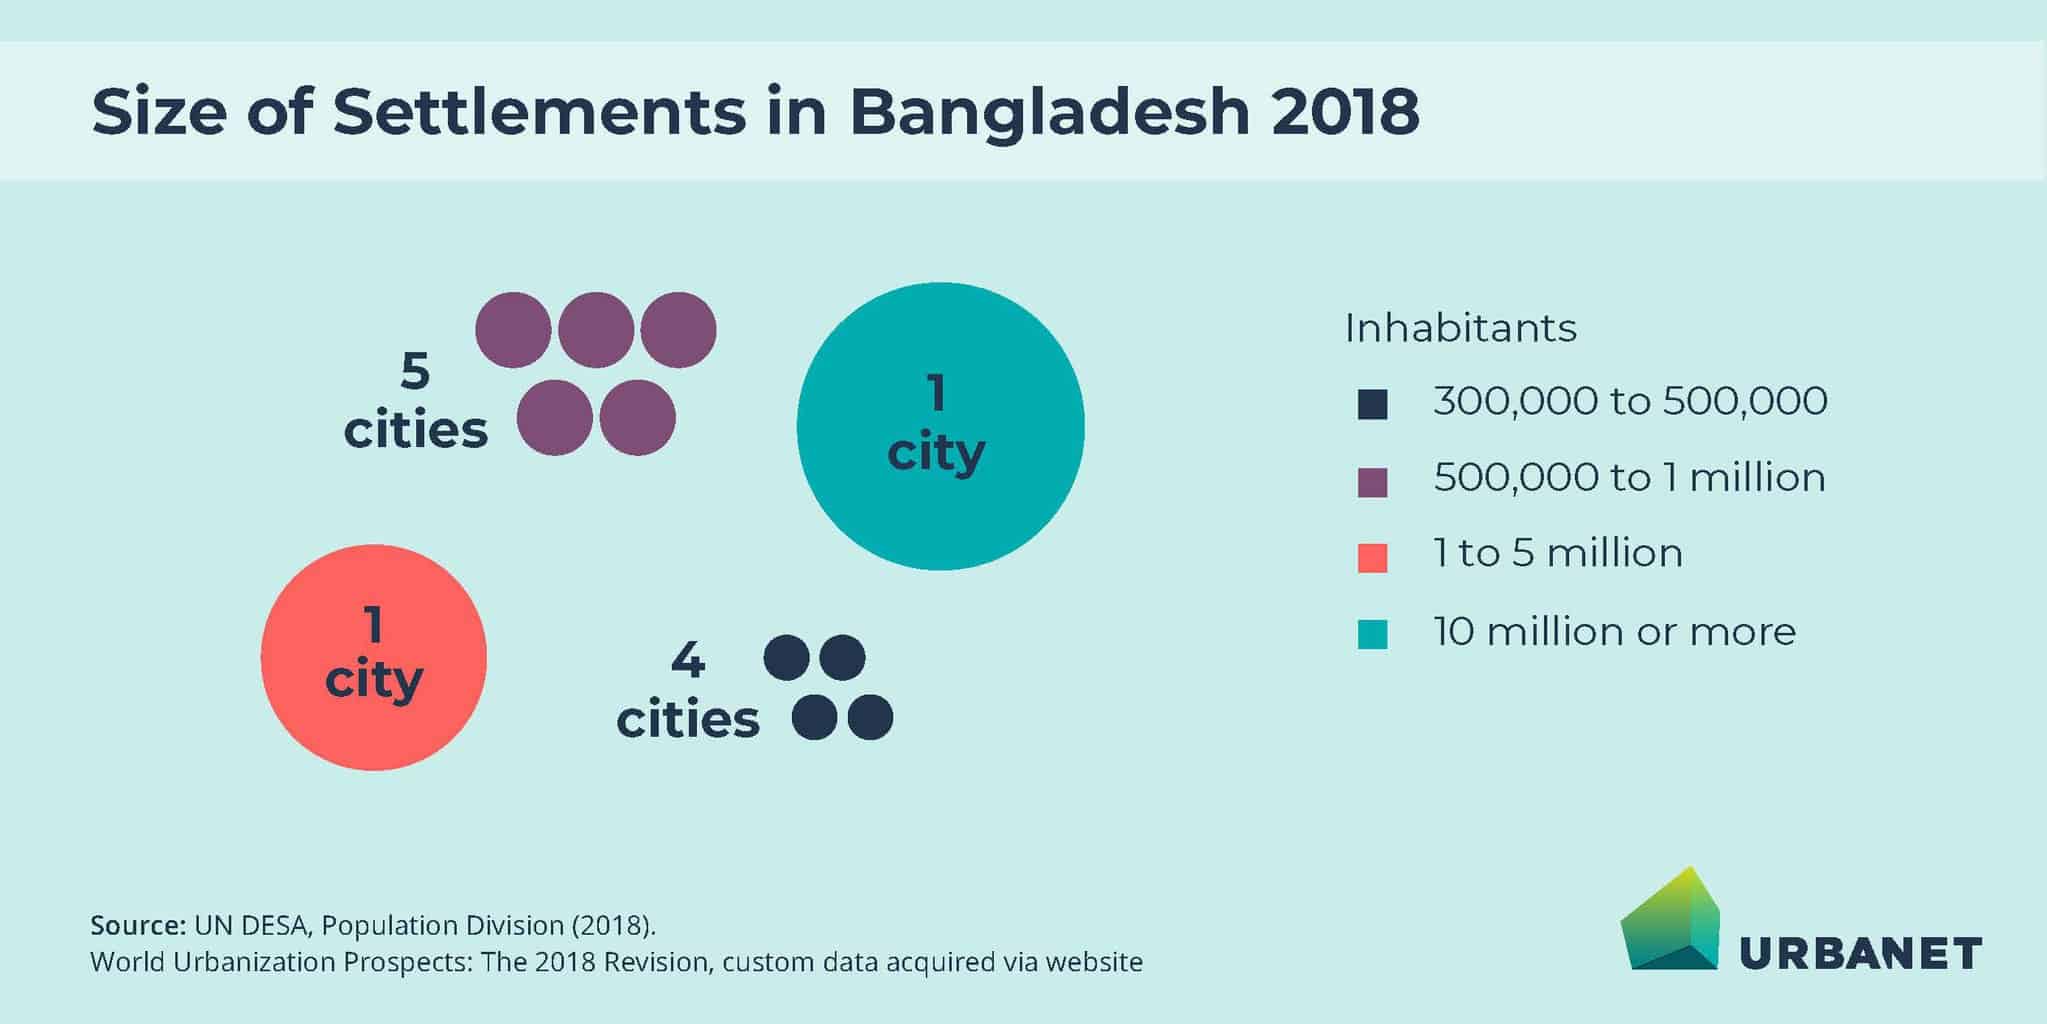 The graphic shows how many cities of each size exist in Bangladesh.